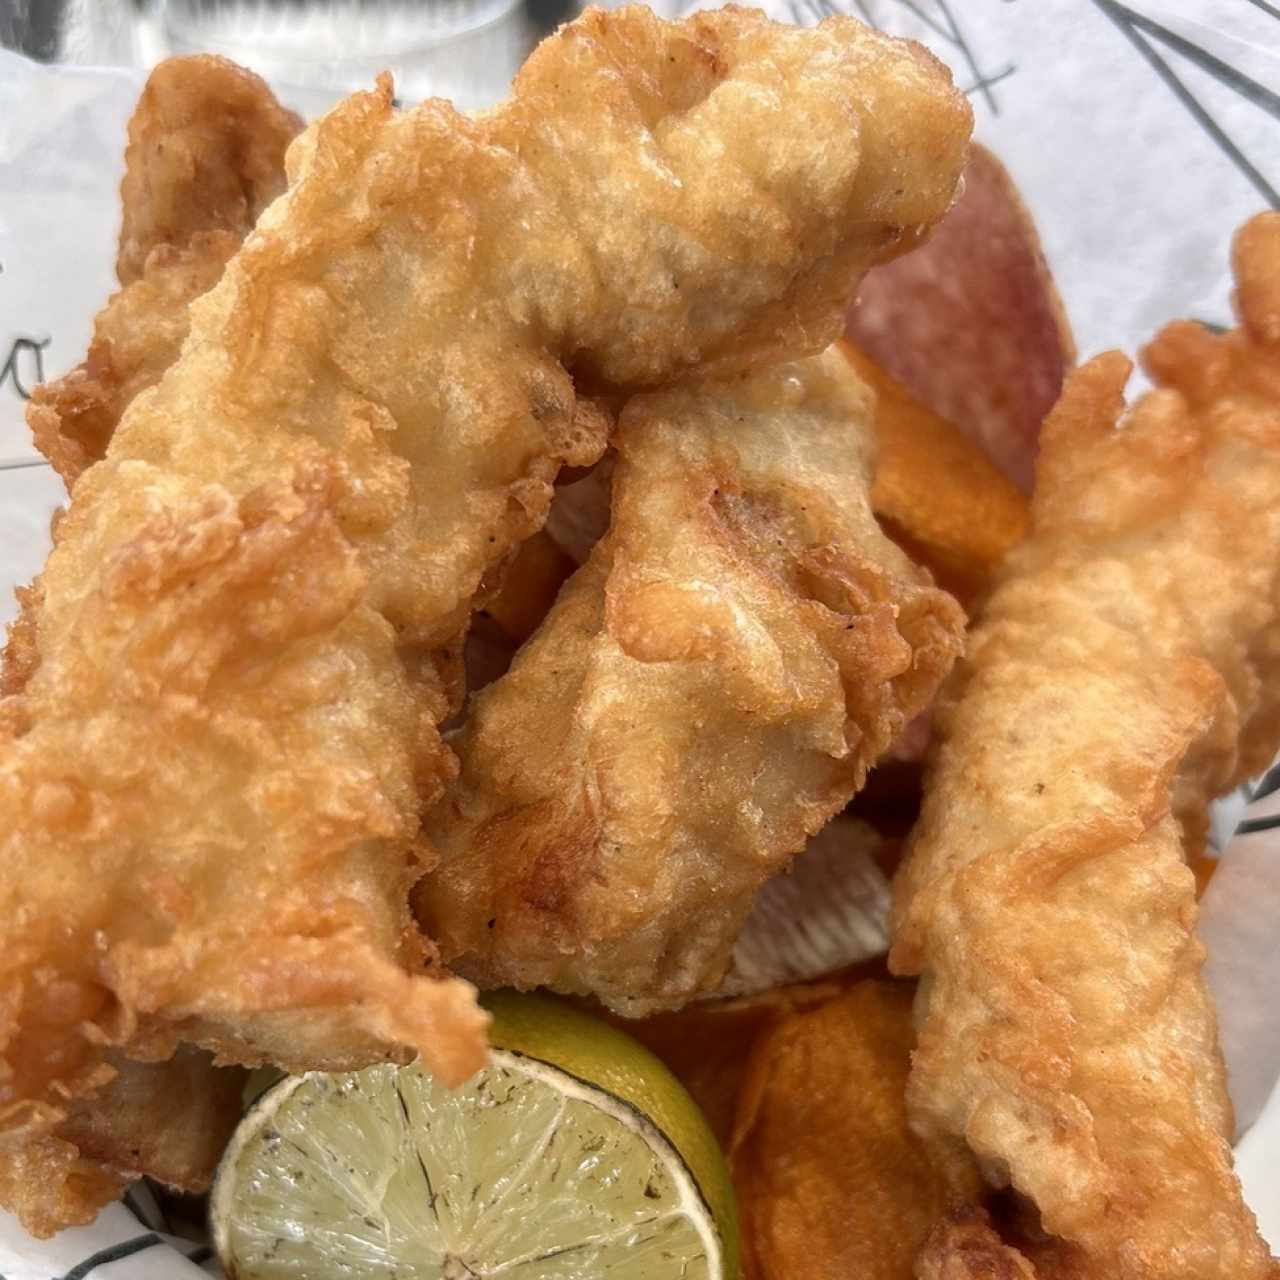 Fish, Chips and more chips